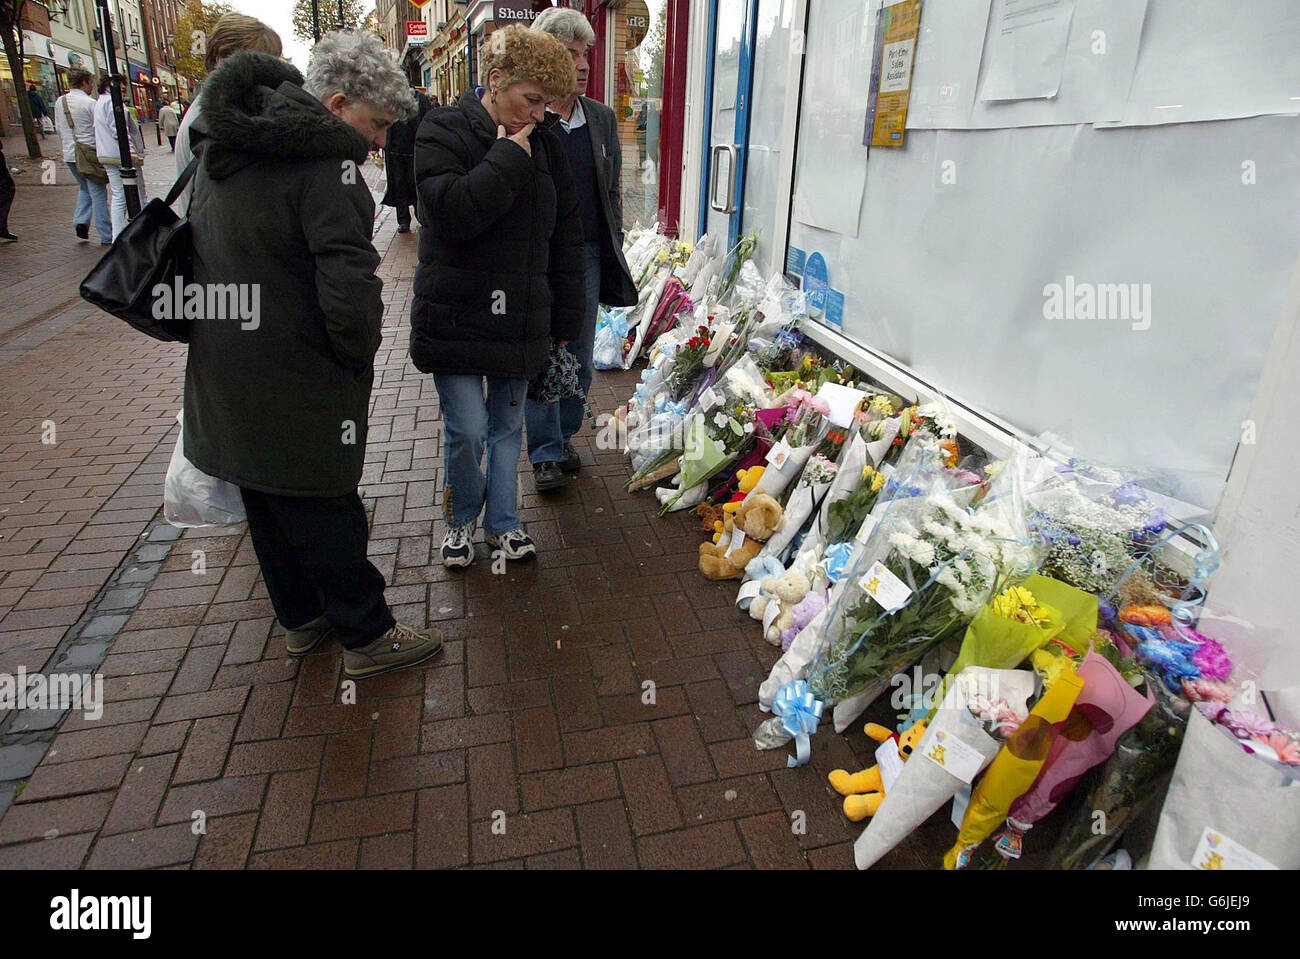 Flowers left at the Greggs Bakery in Carlisle, for a 10-month-old boy who was in the bakery with his mother Lorna, 20, when he was stabbed in the neck yesterday. The father of the boy was continuing to be questioned by police today. Locals named the 10-month-old victim as Hassan Martin. Men in the shop overpowered his attacker and officers from the city s central police station around 100 yards away were quickly on the scene. The baby was taken to Cumberland Infirmary where he was pronounced dead. His mother suffered injuries to her wrist but they were not thought to be life-threatening and Stock Photo